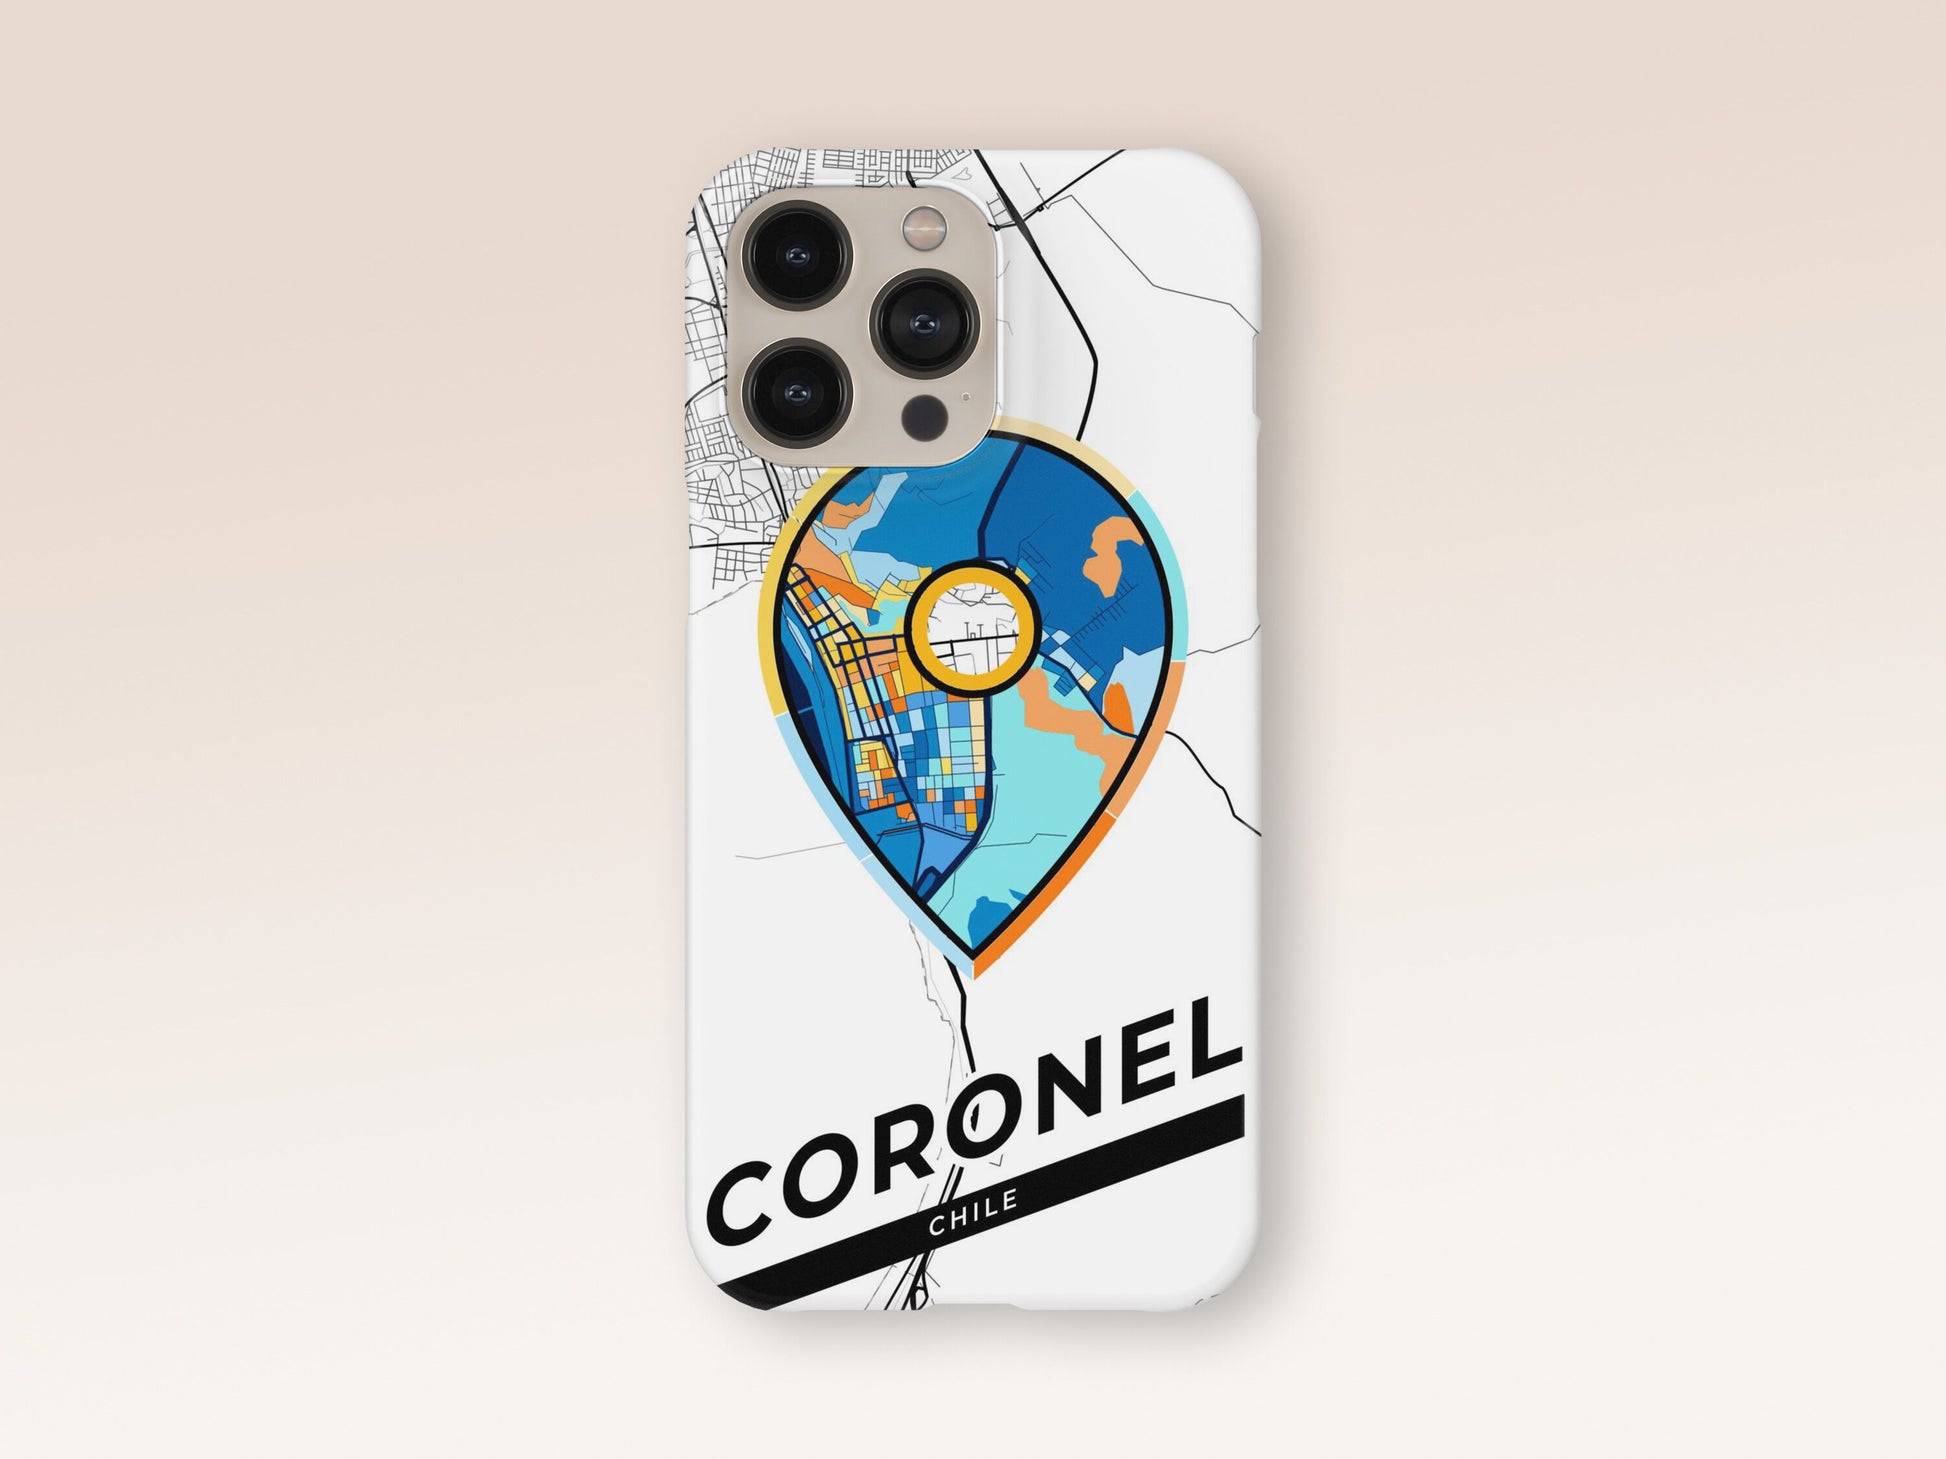 Coronel Chile slim phone case with colorful icon. Birthday, wedding or housewarming gift. Couple match cases. 1